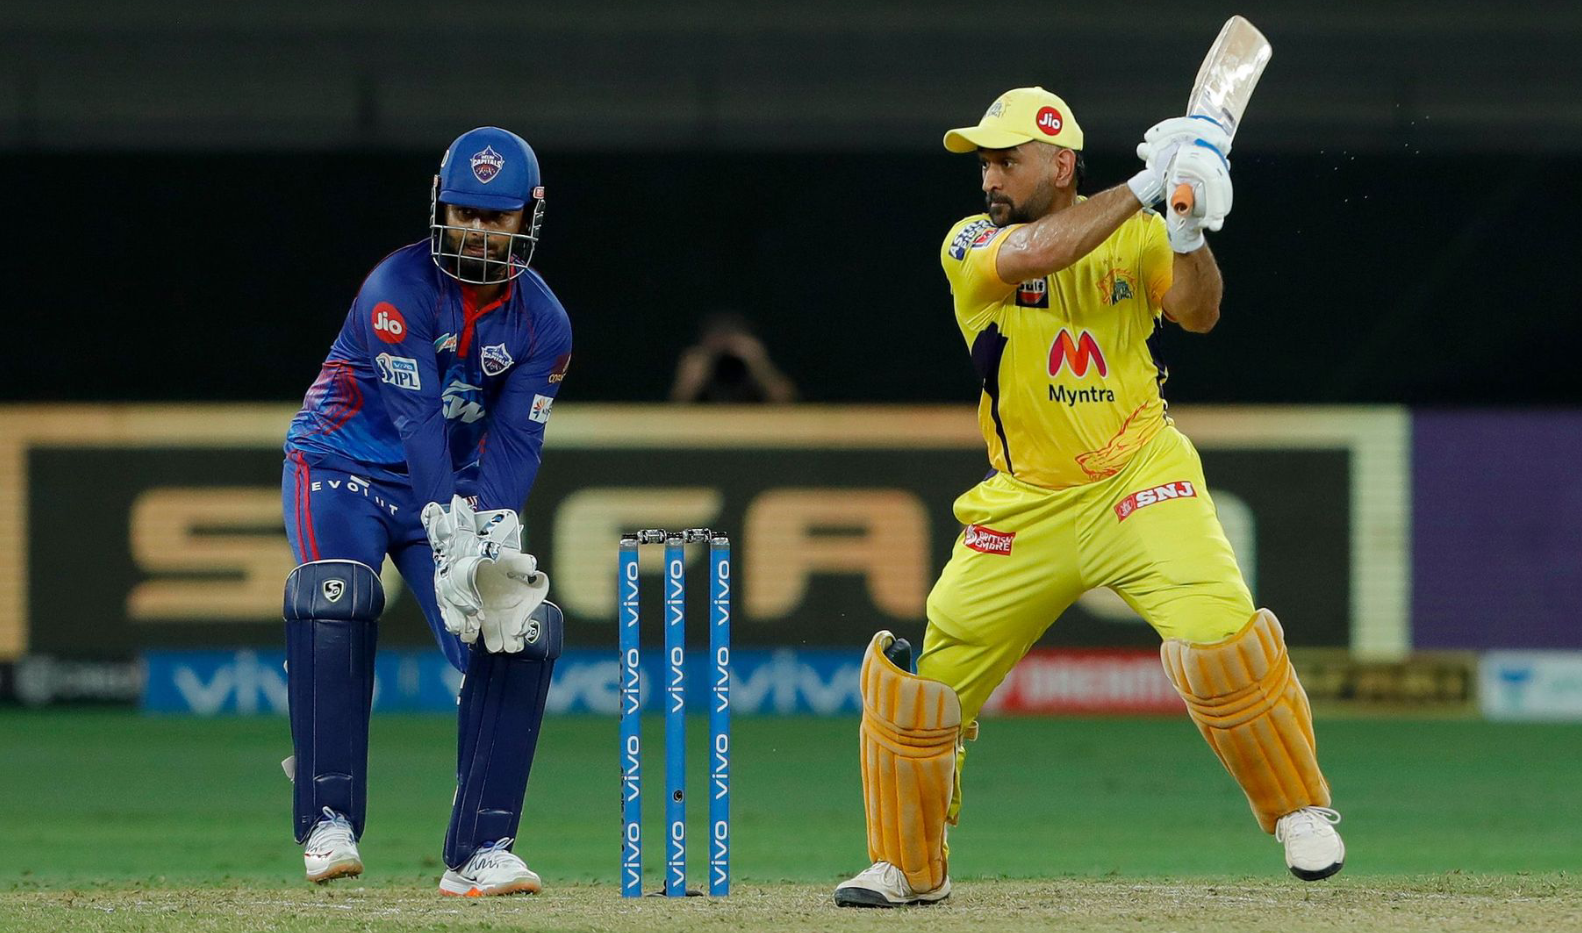 IPL 2021: “He Is A Man Of Big Stages” – Ruturaj Gaikwad And Robin Uthappa Discuss MS Dhoni’s Match-Winning Knock